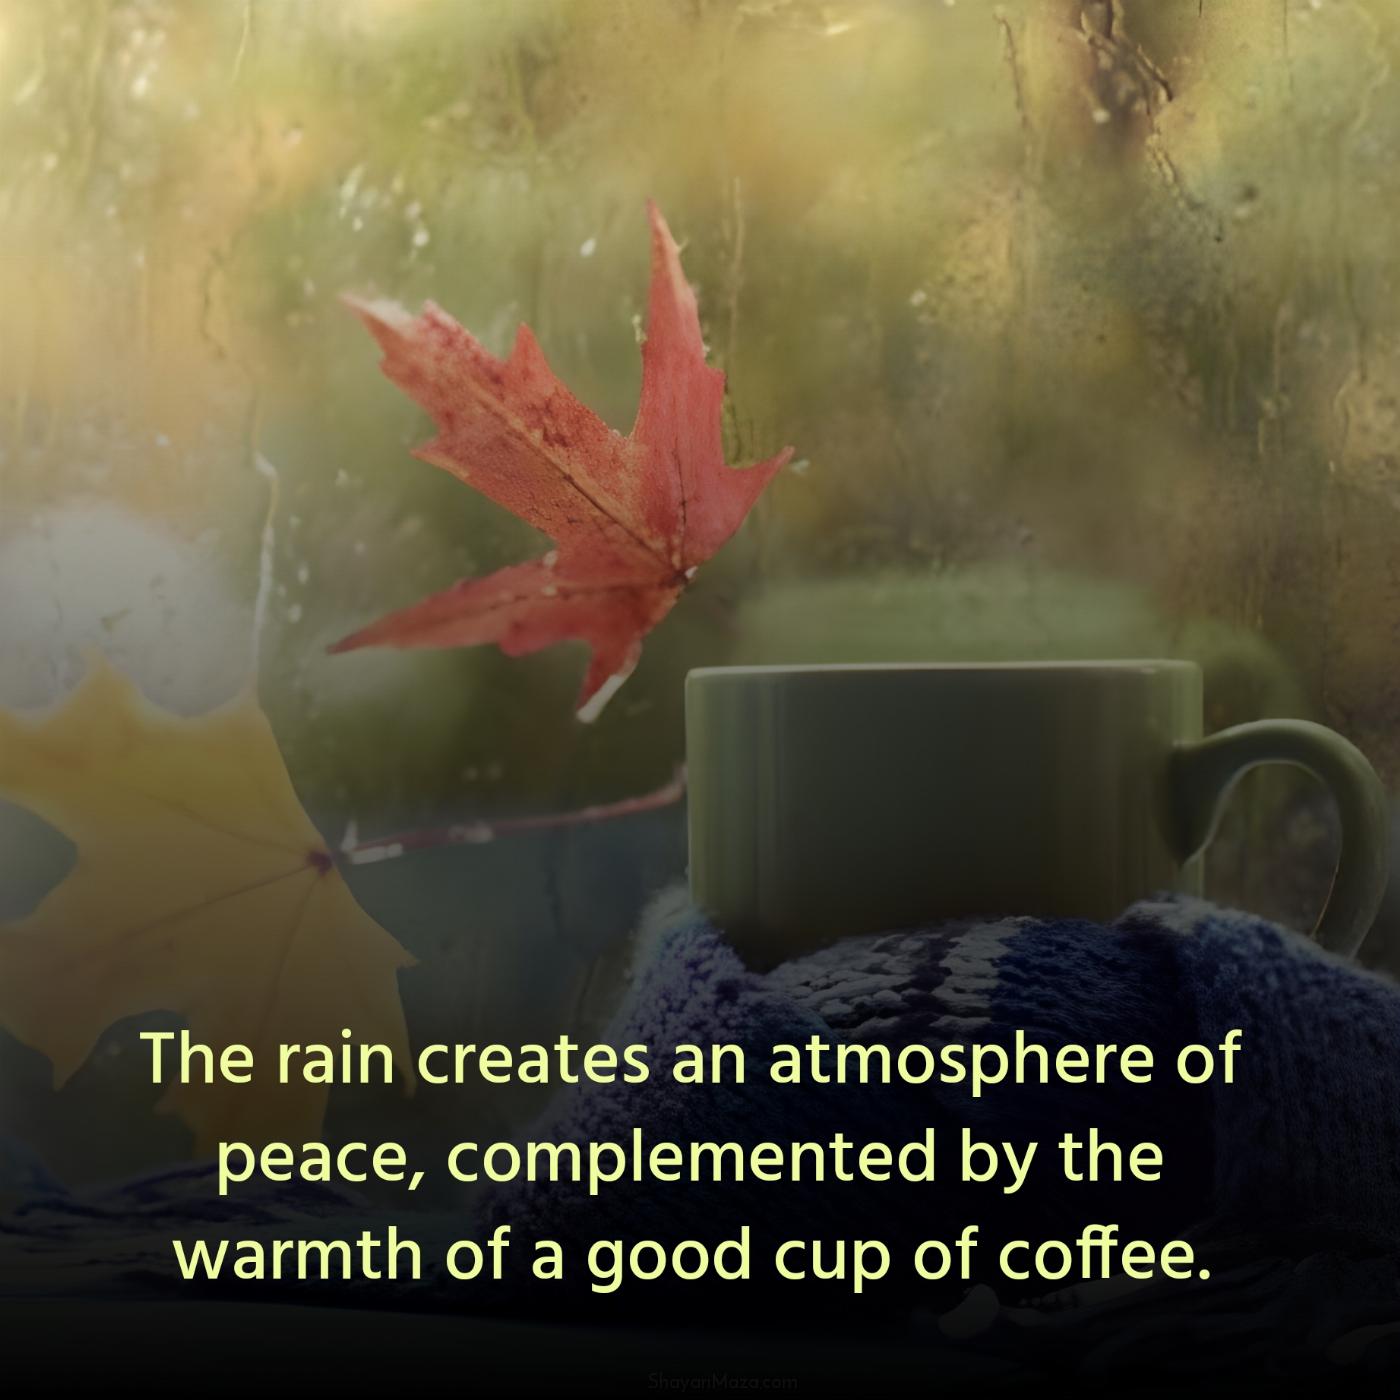 The rain creates an atmosphere of peace complemented by the warmth of a good cup of coffee